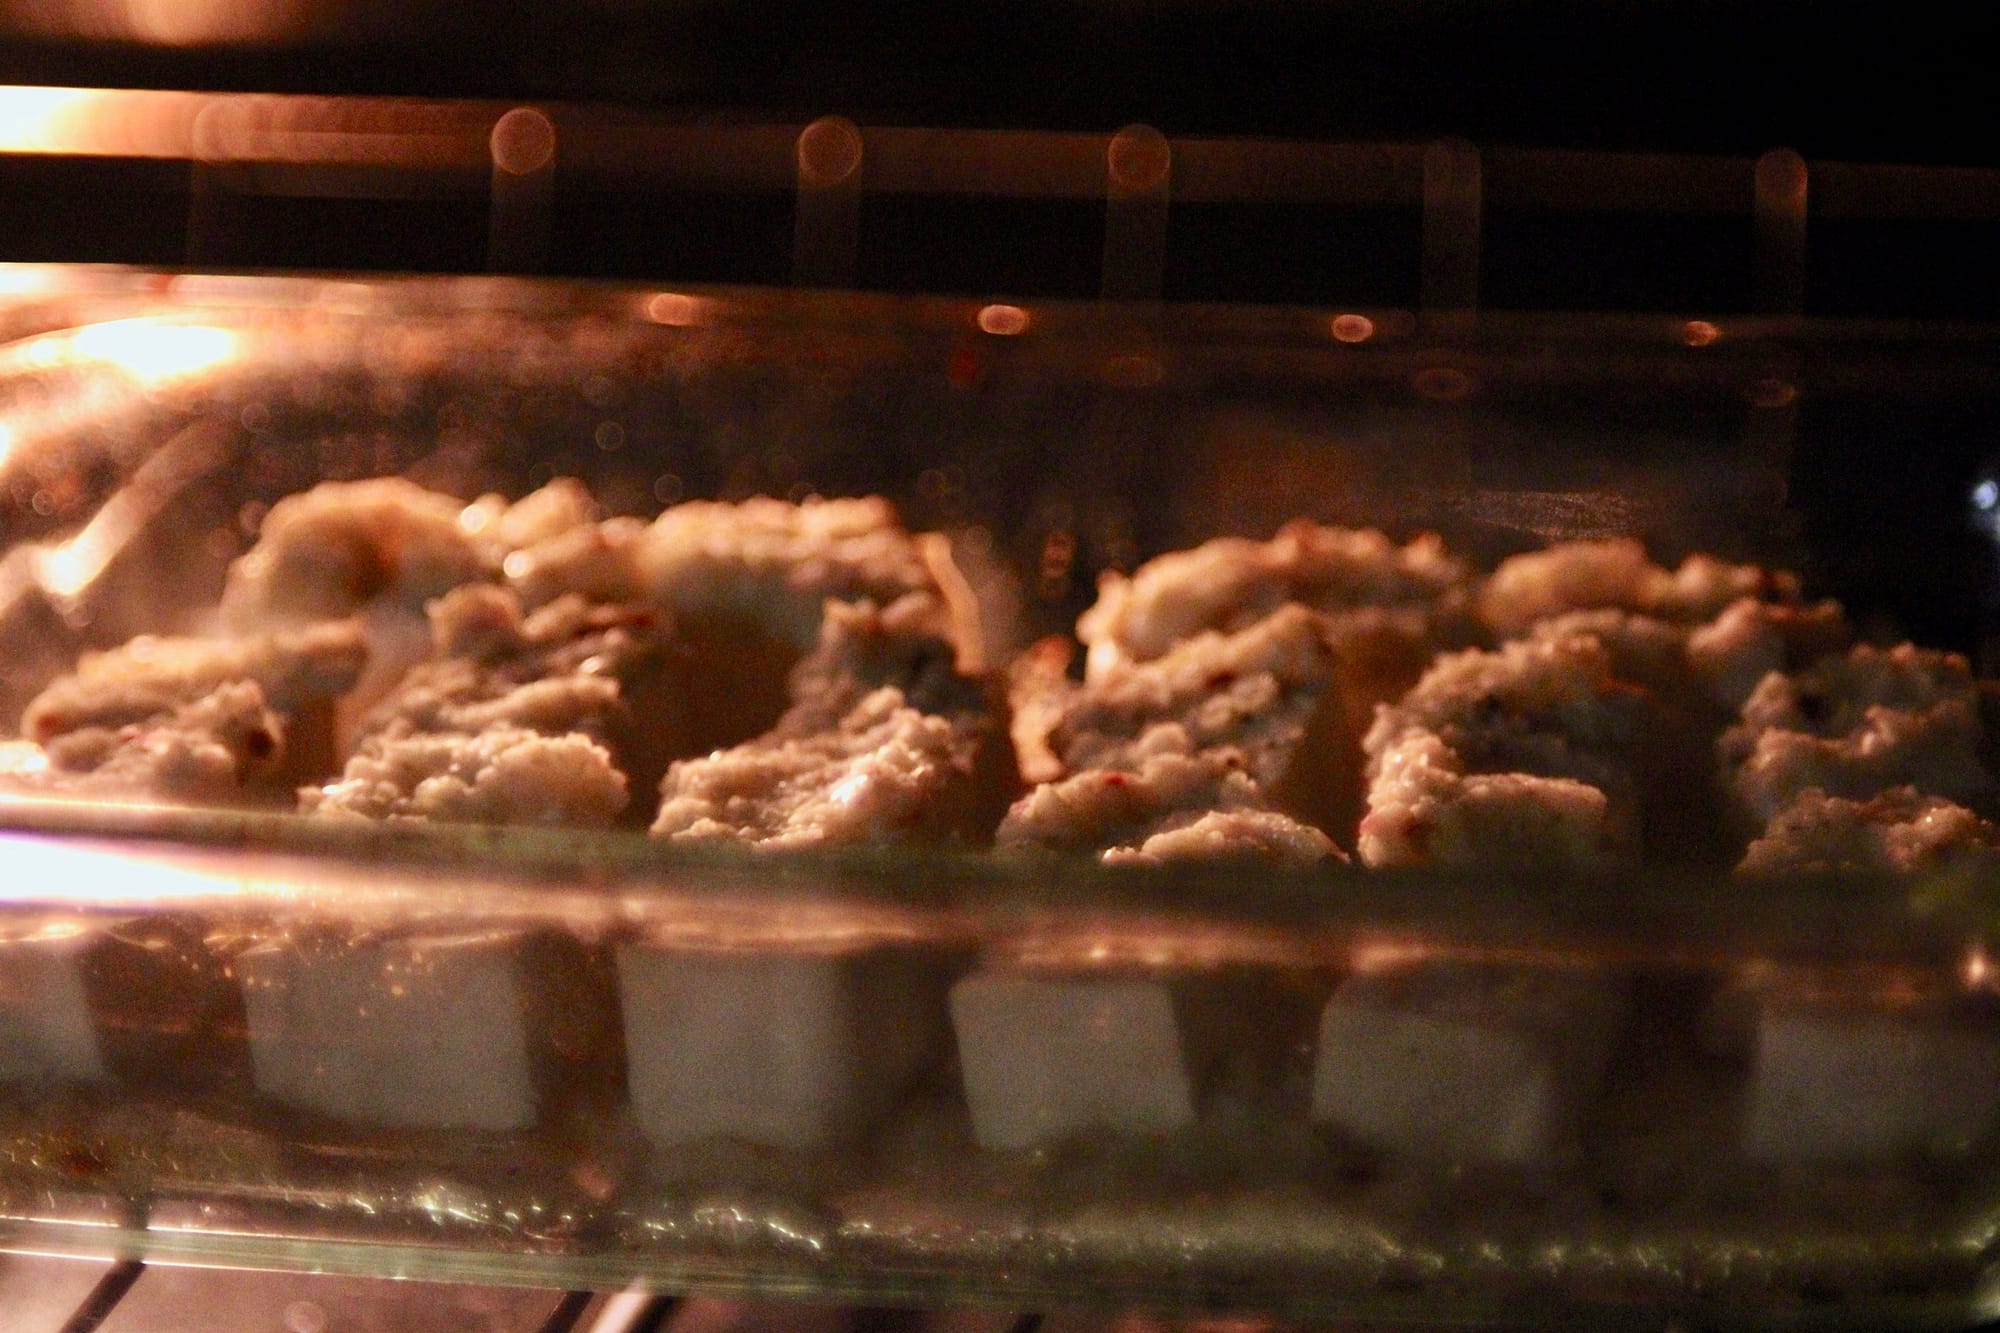 Tofu baking in the oven.